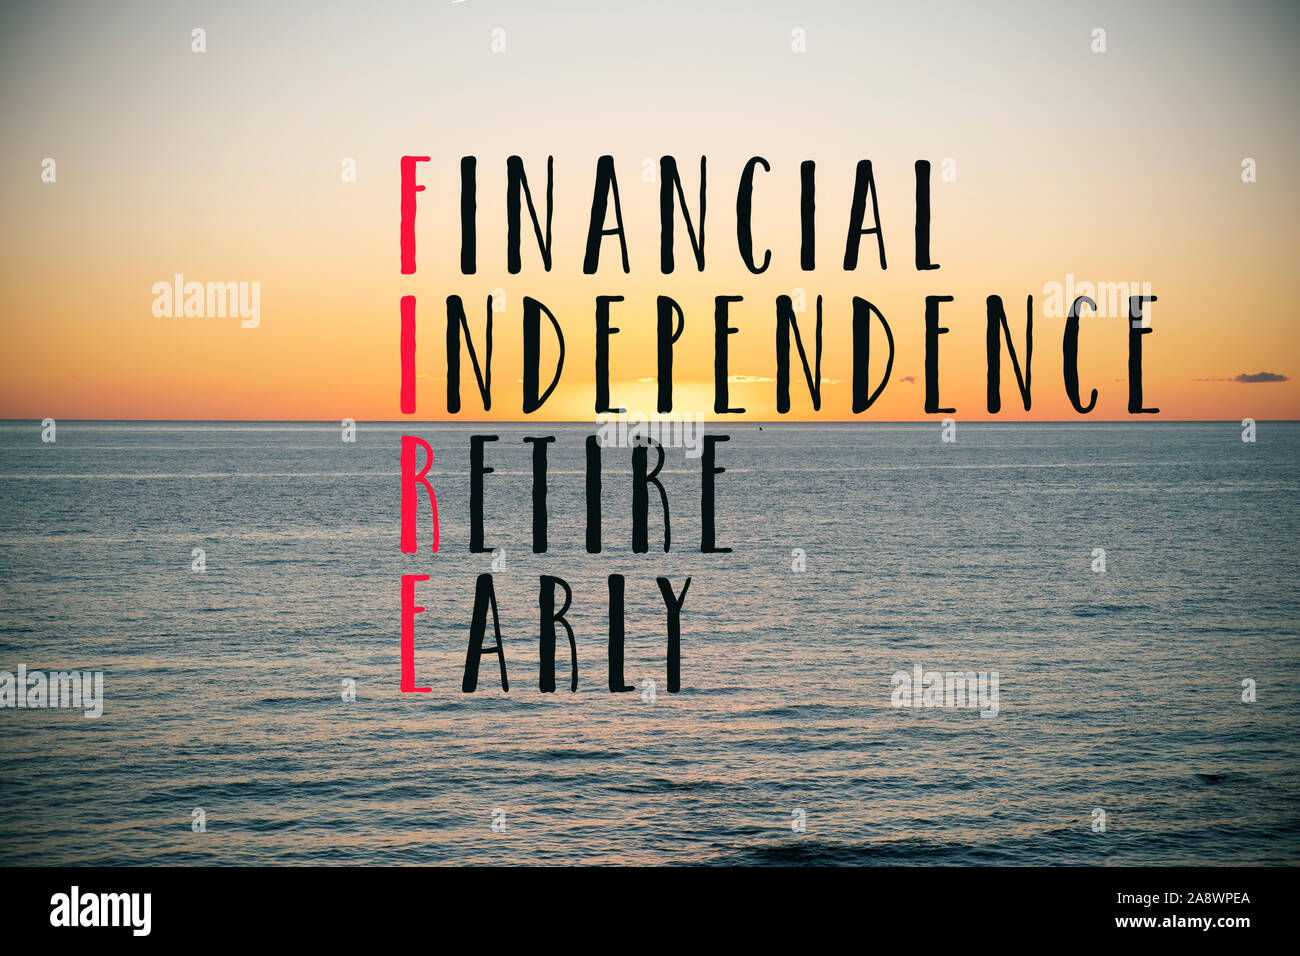 the word fire, acronym for financial independence retire early, on the sky and the ocean at dawn or at sunset Stock Photo